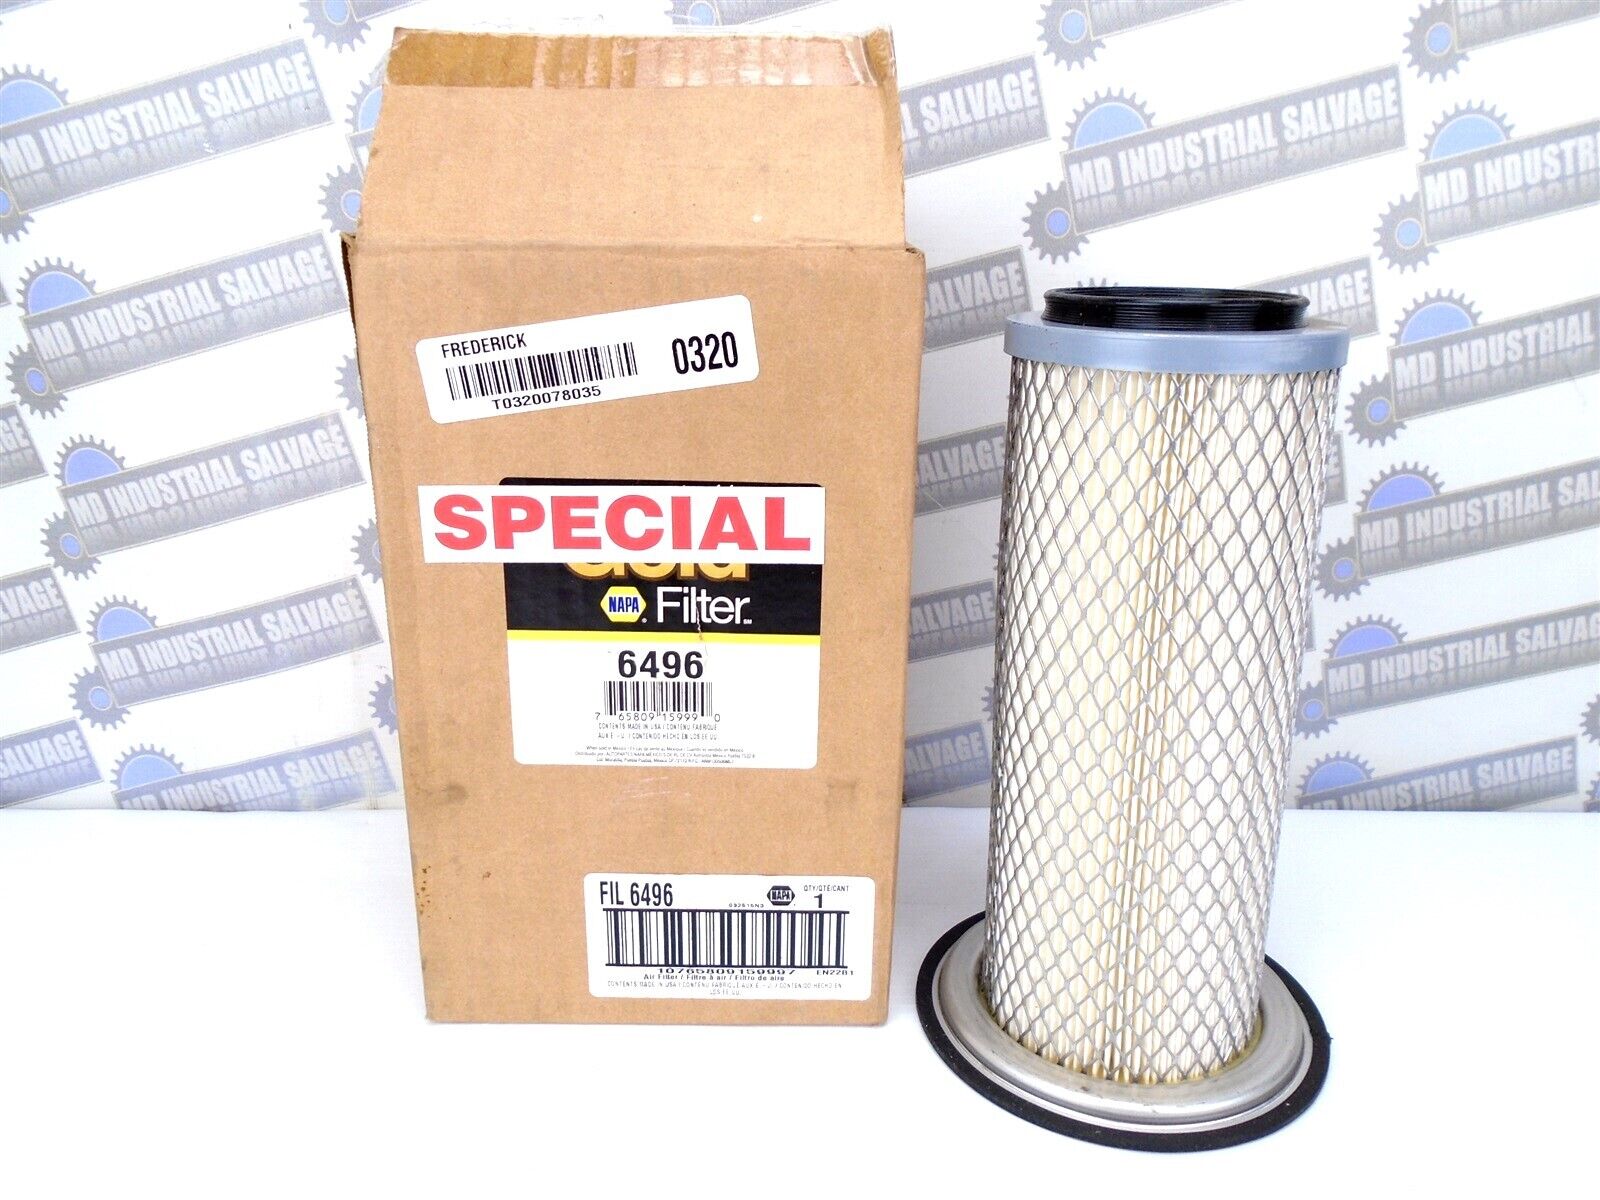 NAPA GOLD FILTER - 6496 - HEAVY DUTY AIR FILTER - Kubuto, Gravely (NEW IN BOX) 